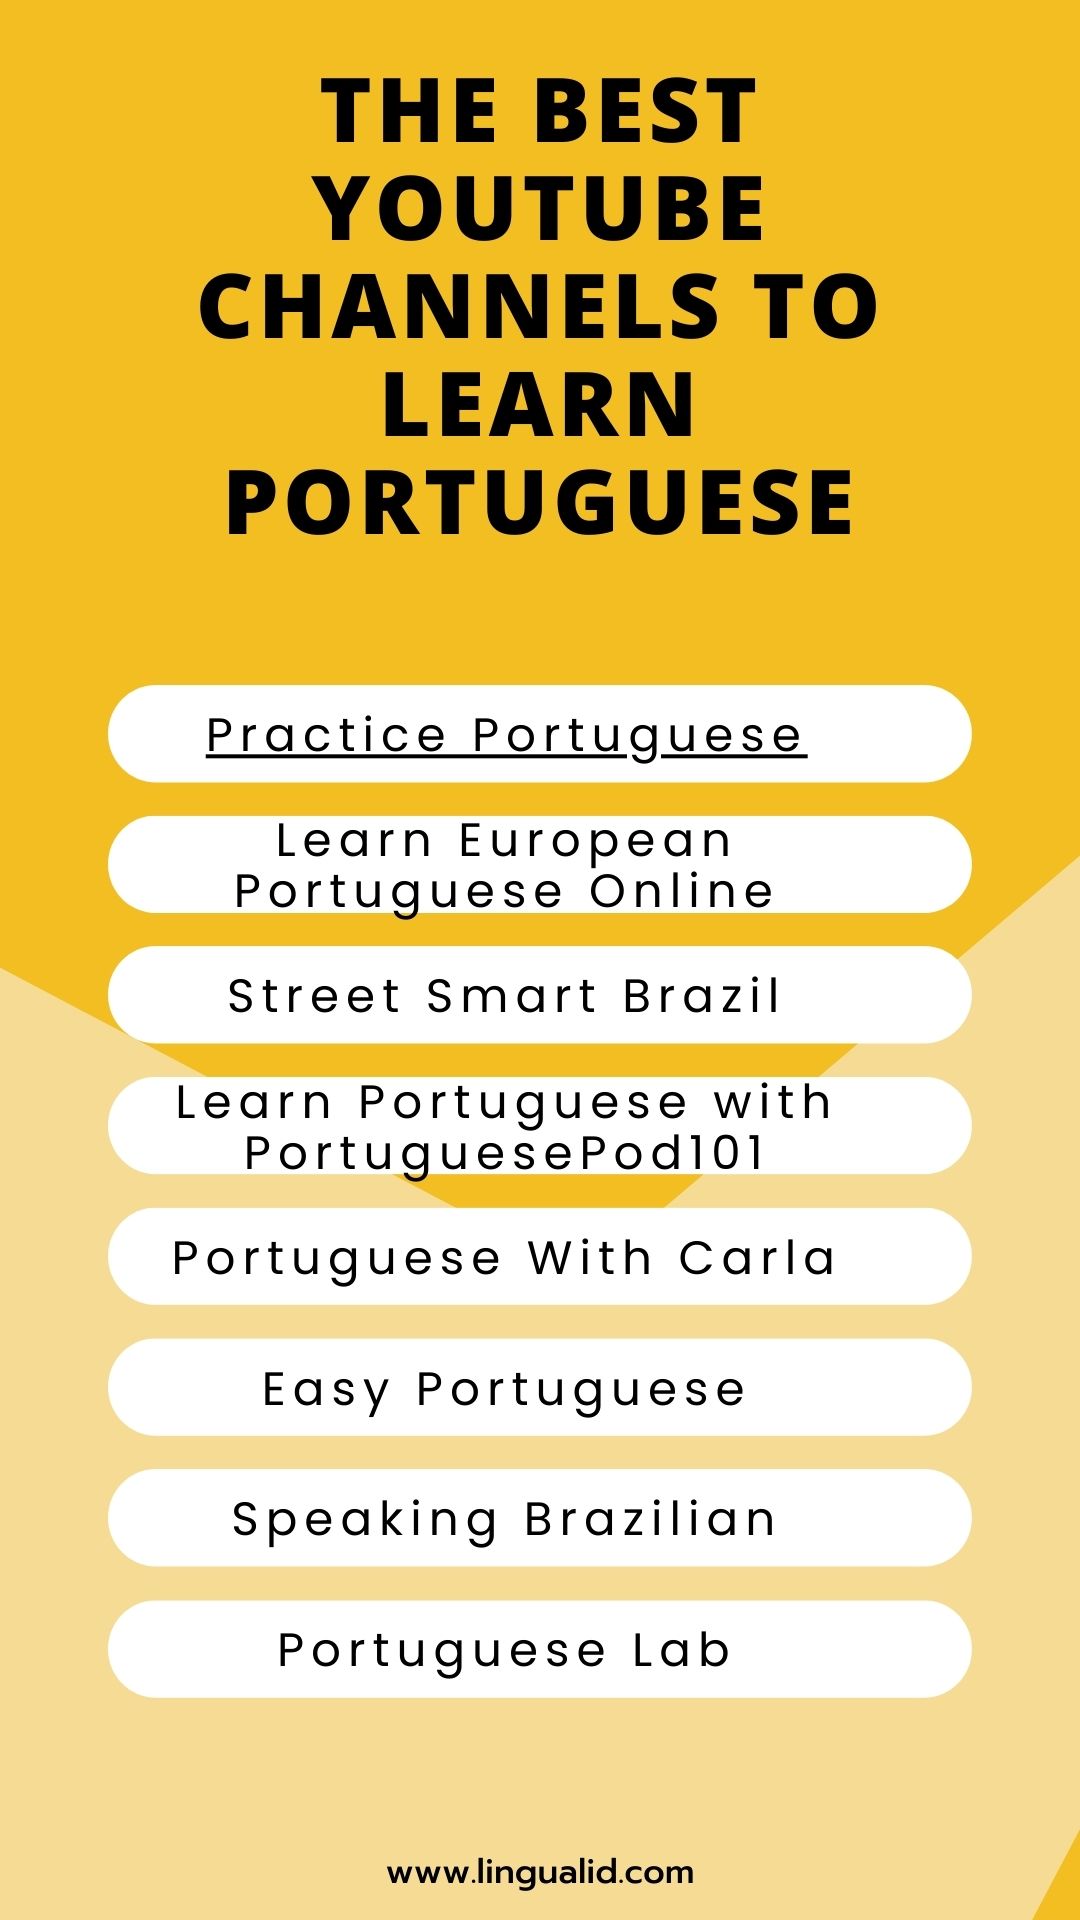 Best YouTube Channels to Learn Portuguese